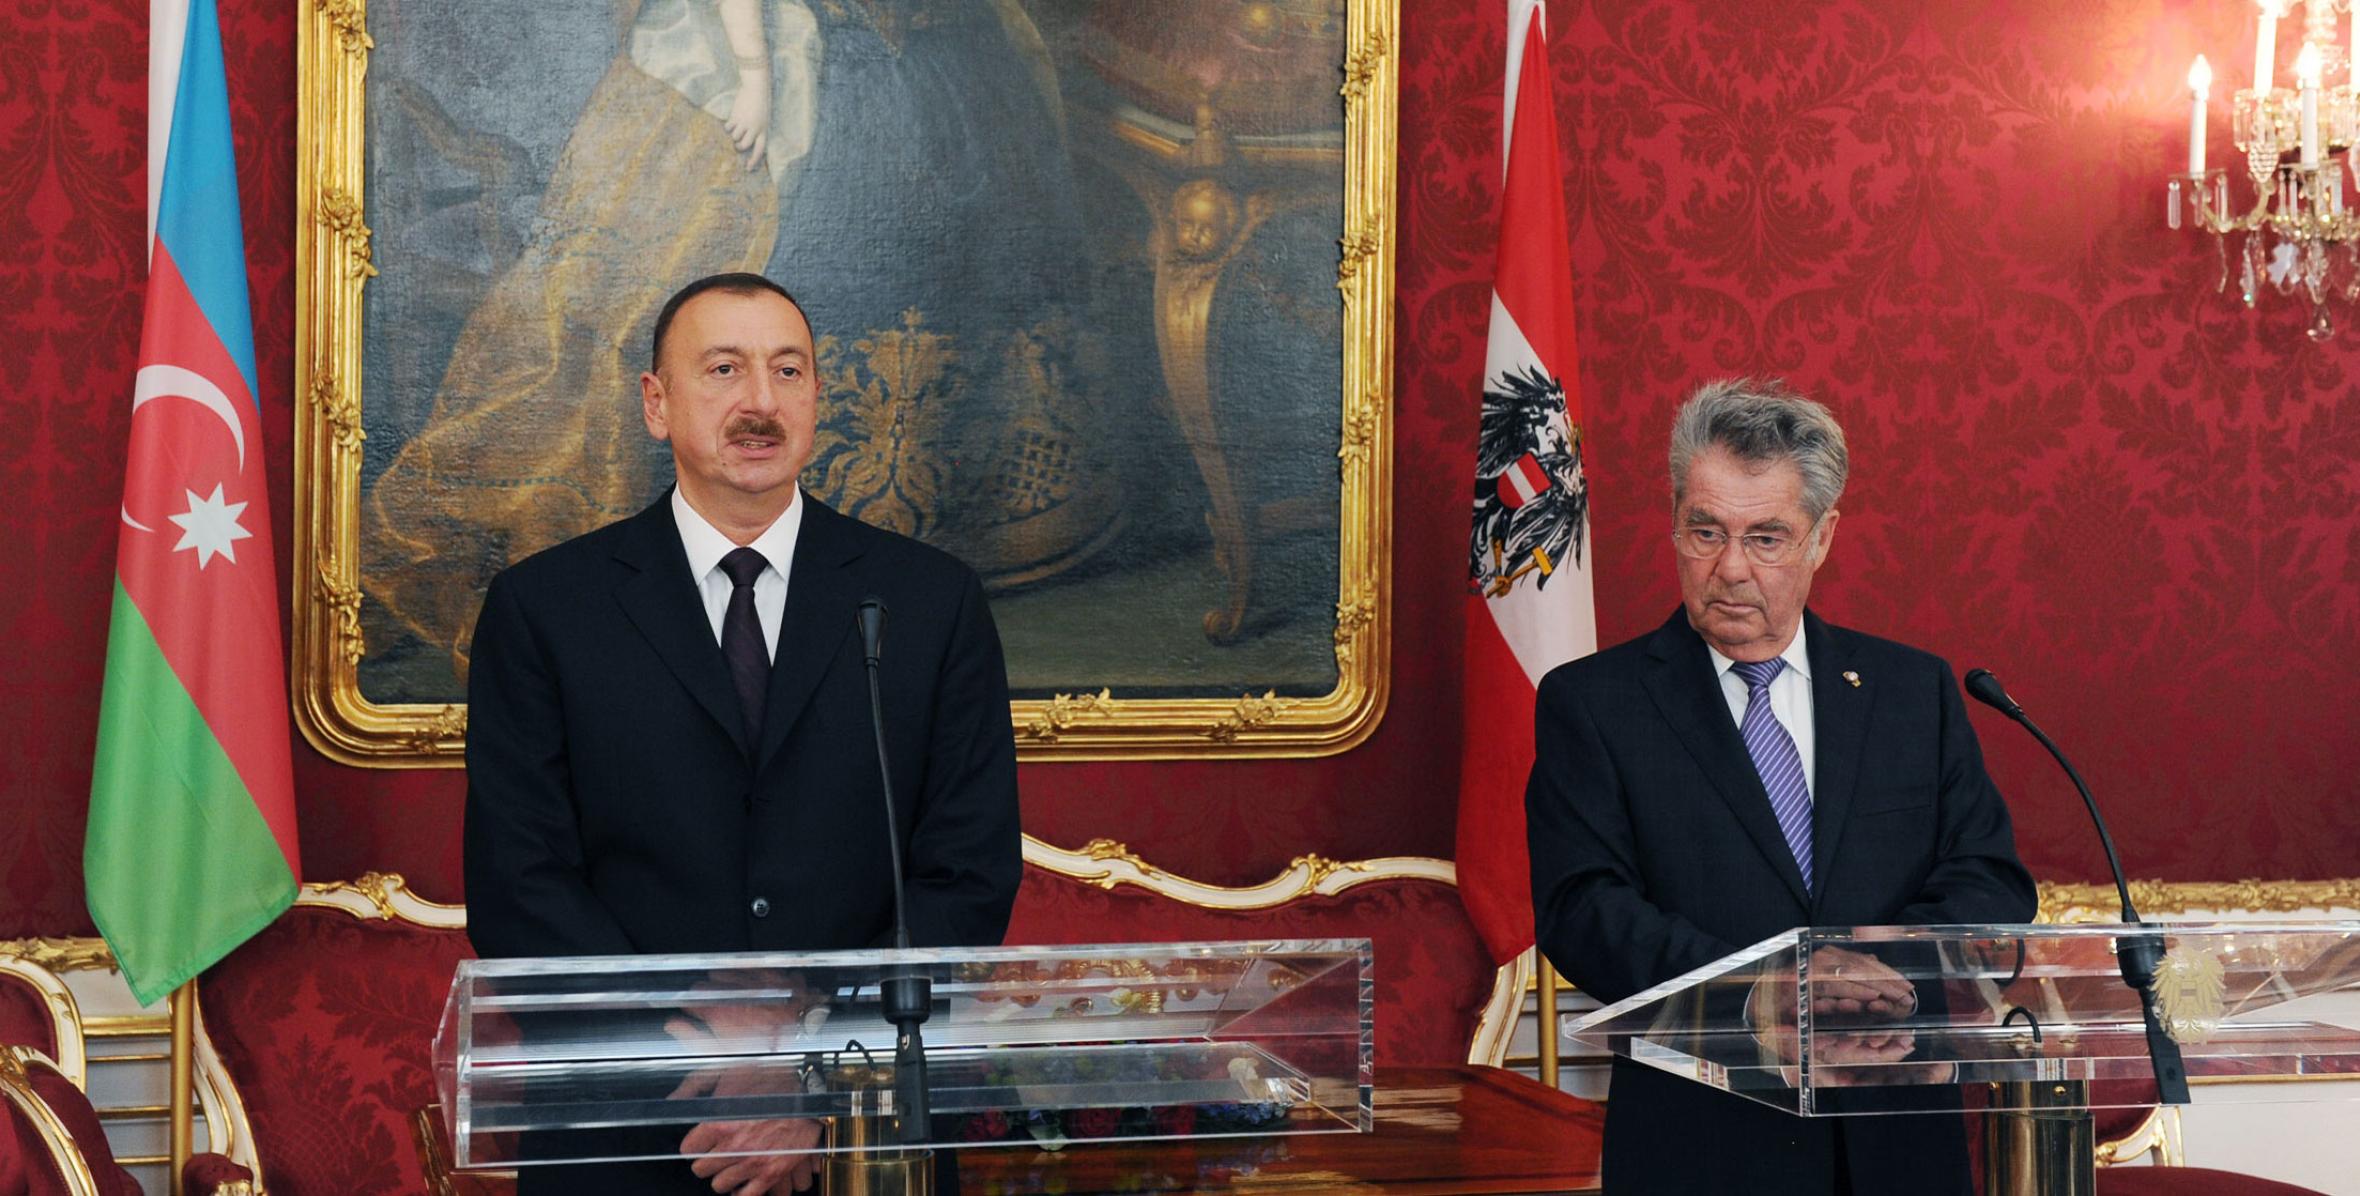 Press-conference of the Presidents of Azerbaijan and Austria was held